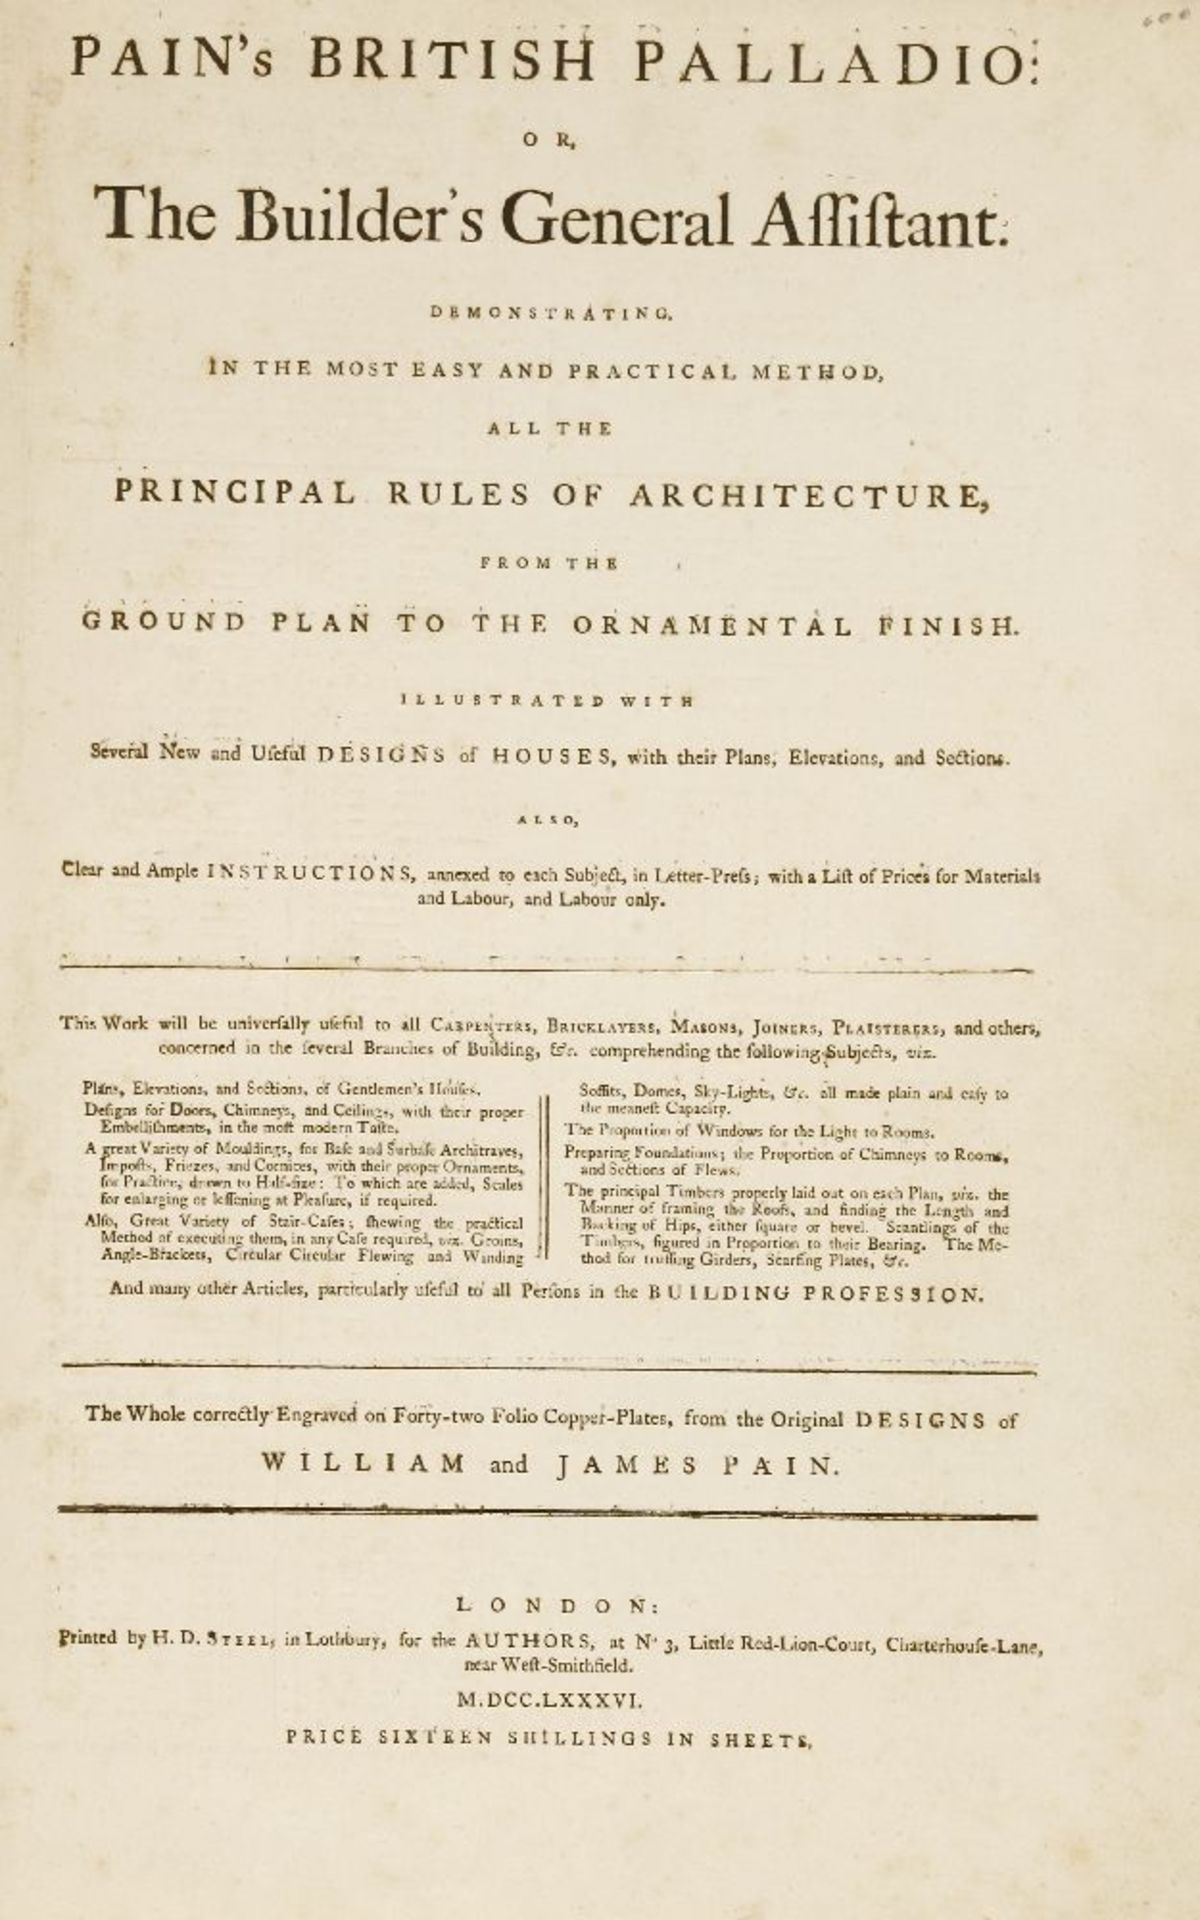 Pain, William & James: Pain's British Palladio; or, the builder’s general assistant, with 42 Folio - Image 2 of 3